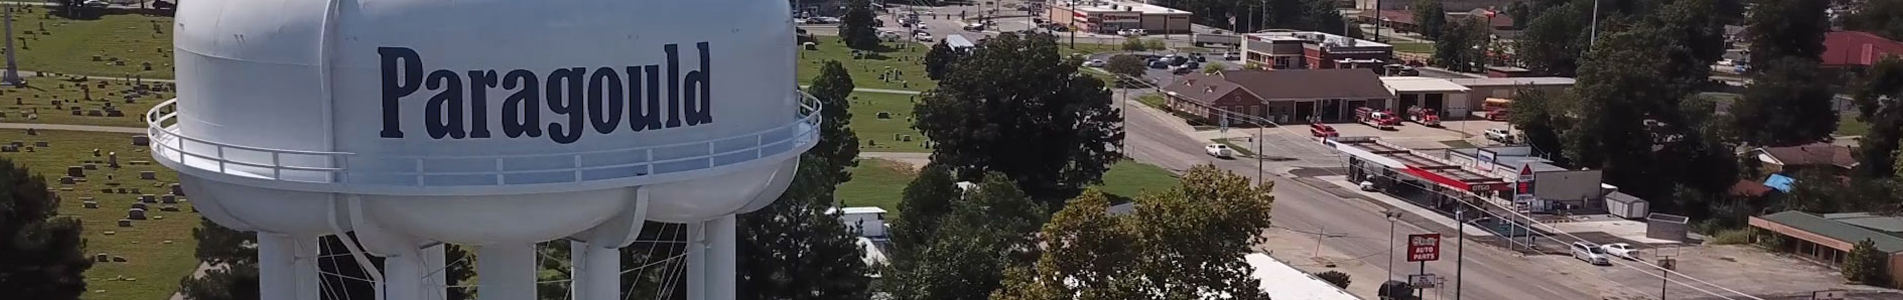 Paragould water tower image shot from above